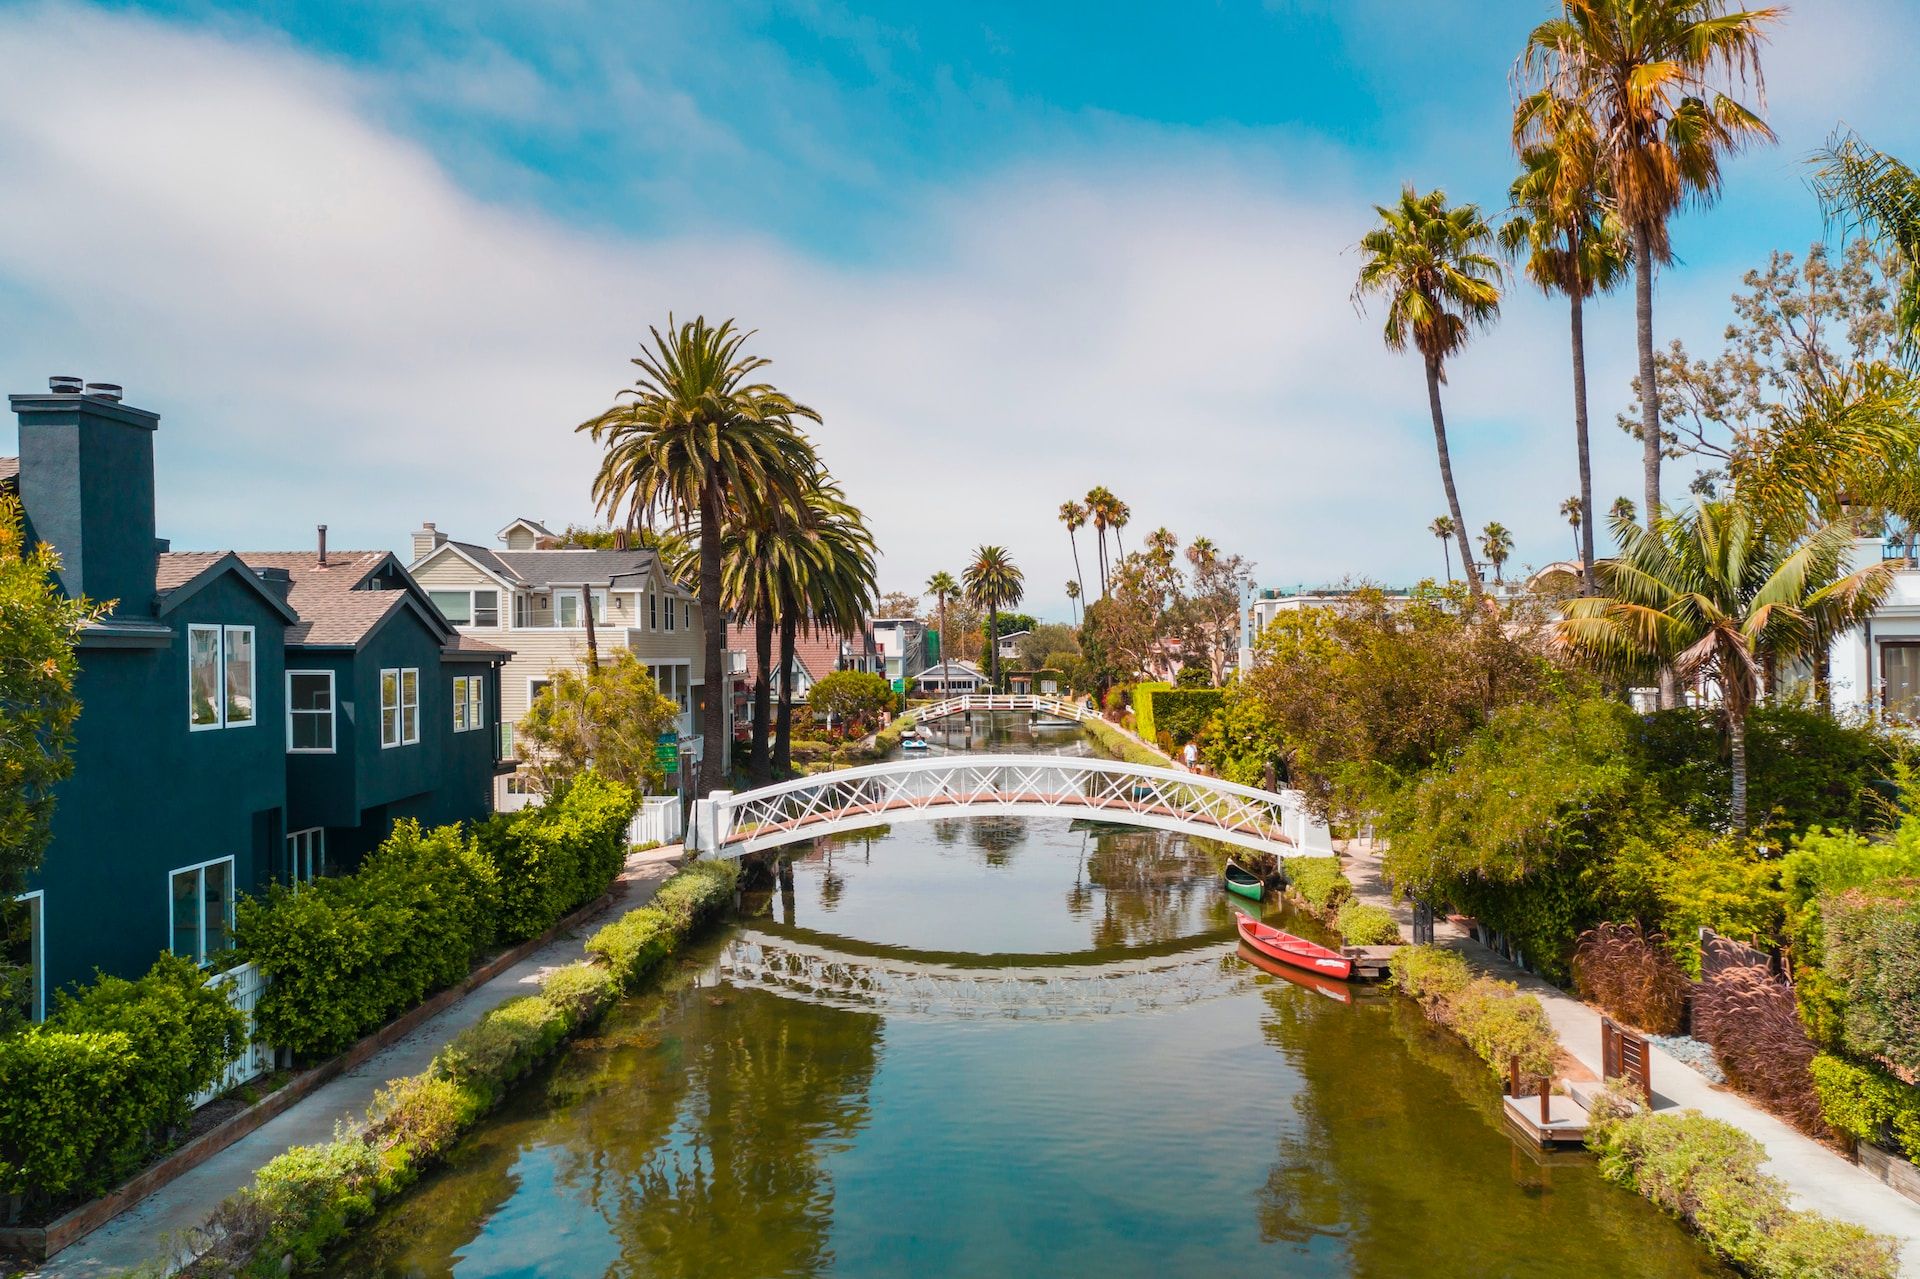 The Venice Canals in Los Angeles